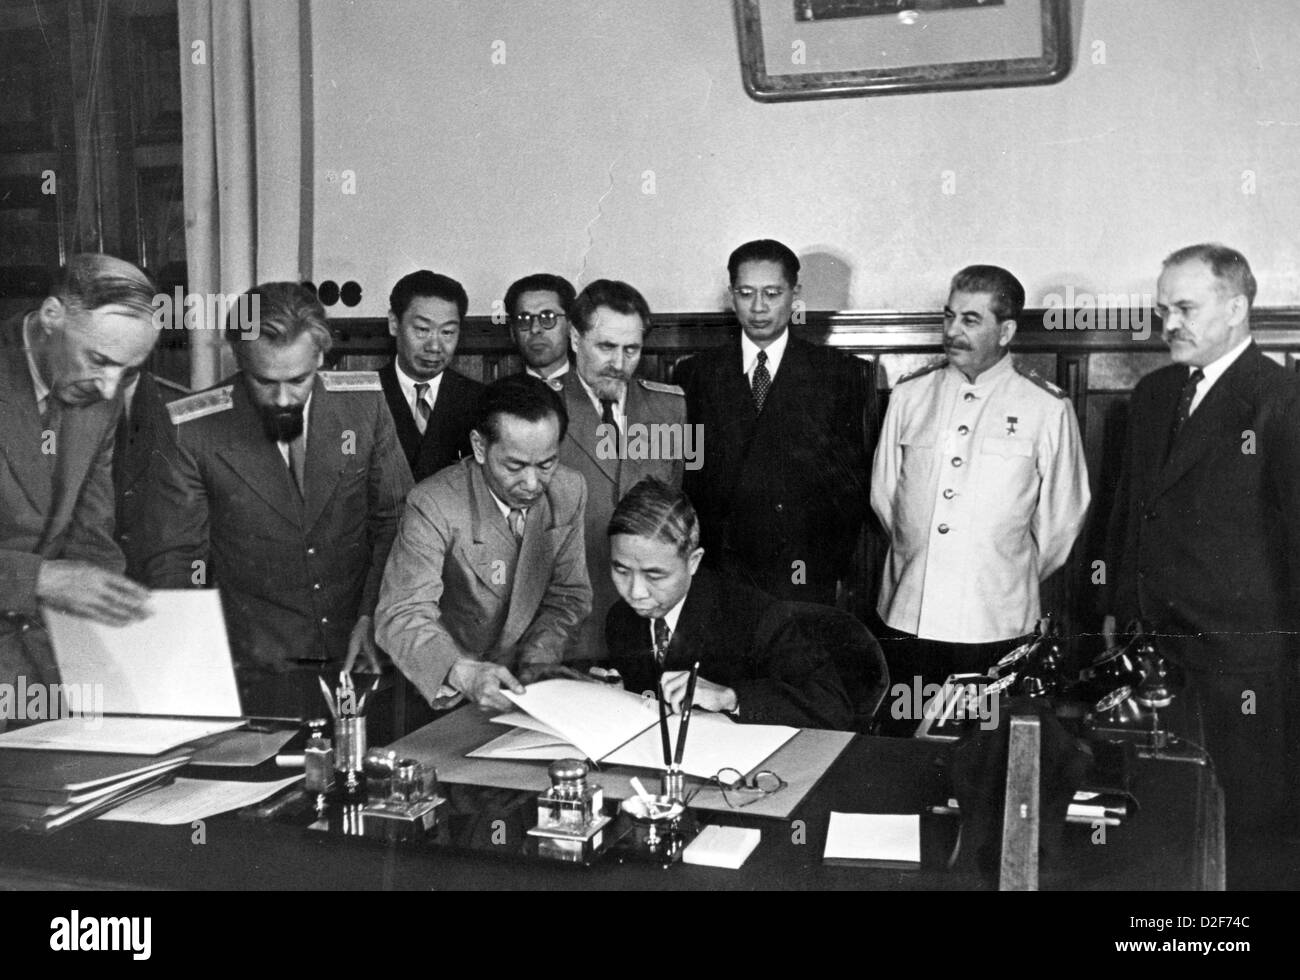 CHINESE- SOVIET TREATY 1945. Stalin in white jacket and Molotov at right watch Wang Shih-chieh signing in Moscow 14 August 1945 Stock Photo